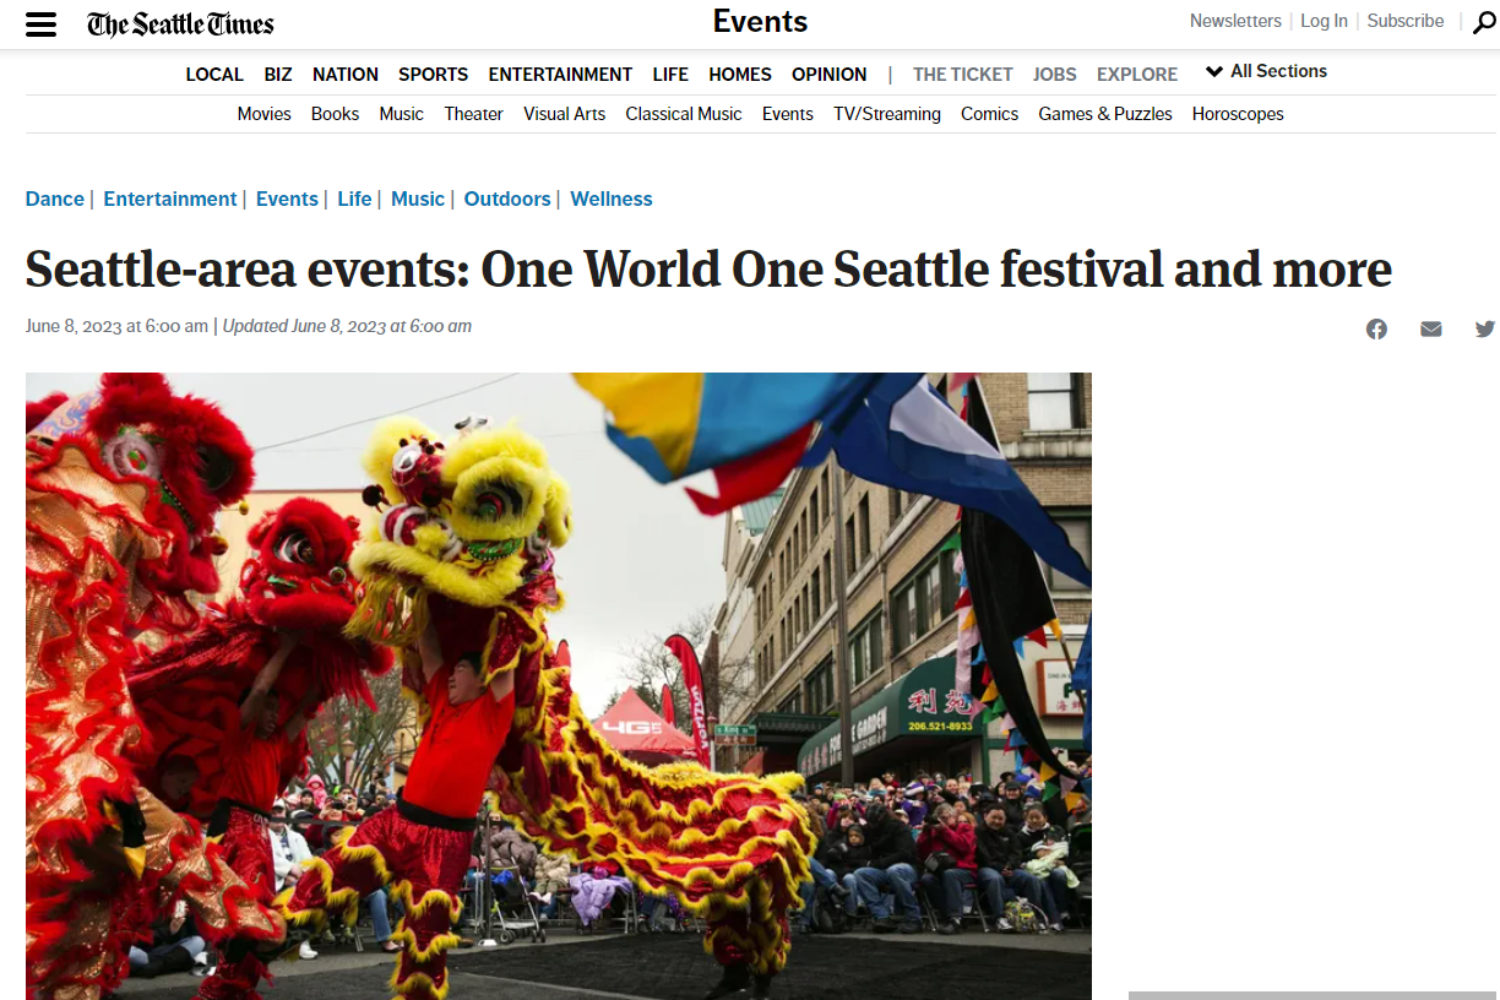 https://www.nwshare.org/wp-content/uploads/2023/06/SeattleTimes-1500x1000.png